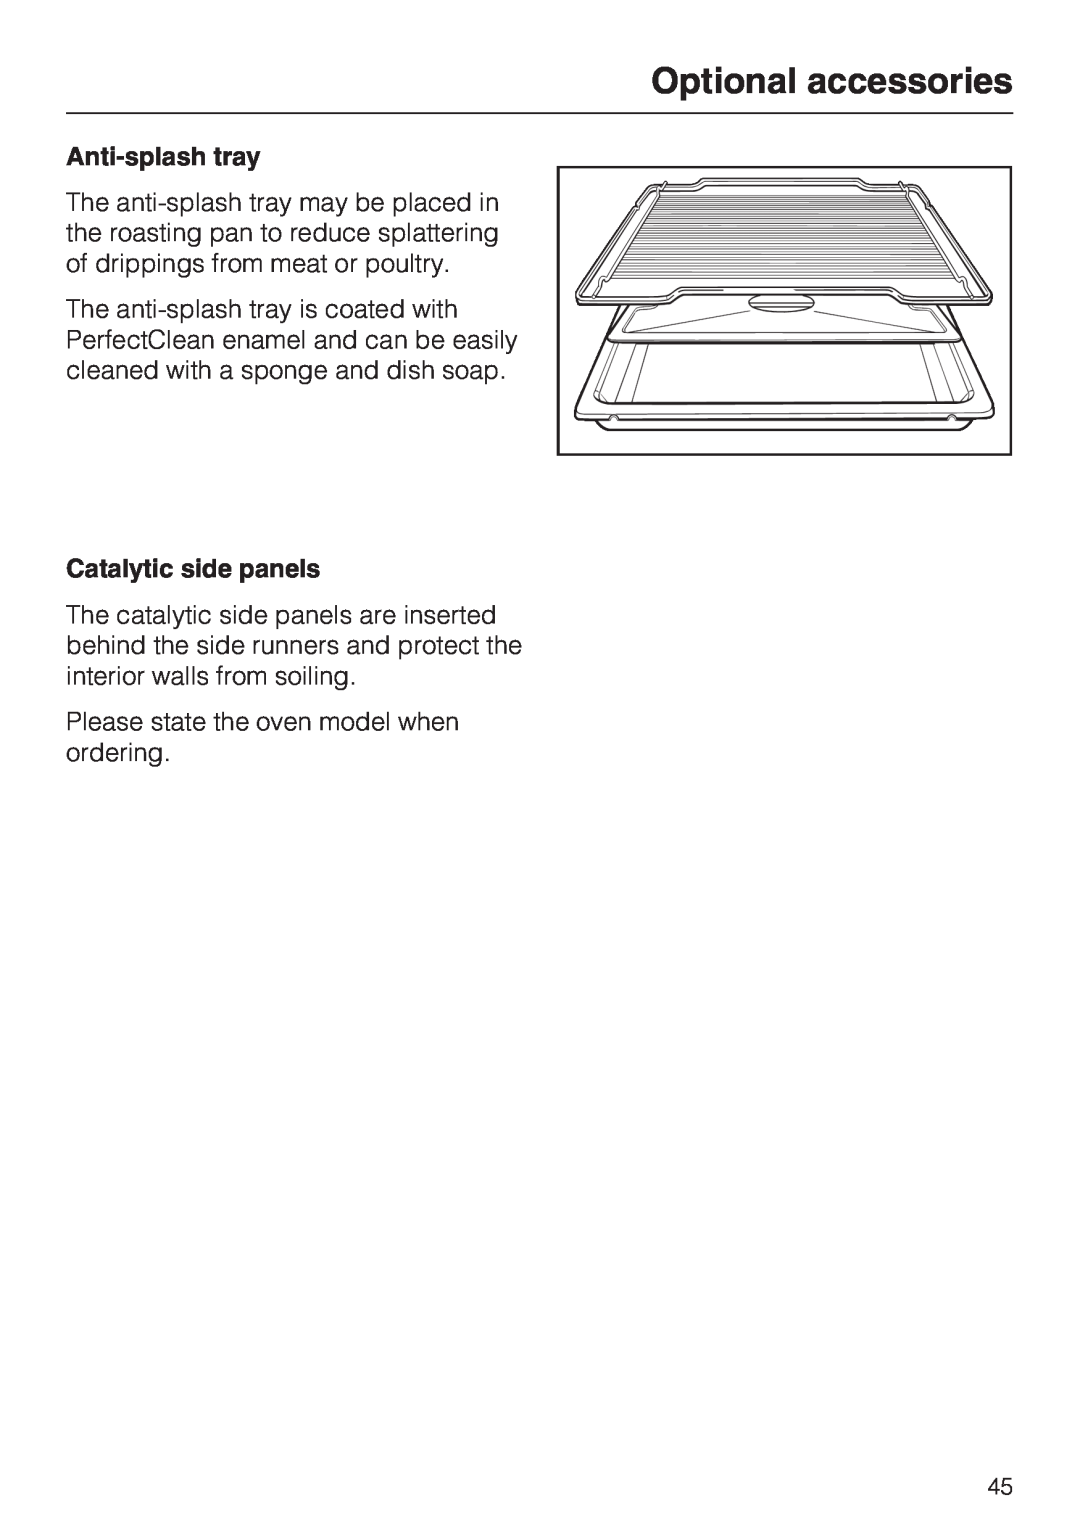 Miele H 4242 B installation instructions Optional accessories, Anti-splashtray, Catalytic side panels 